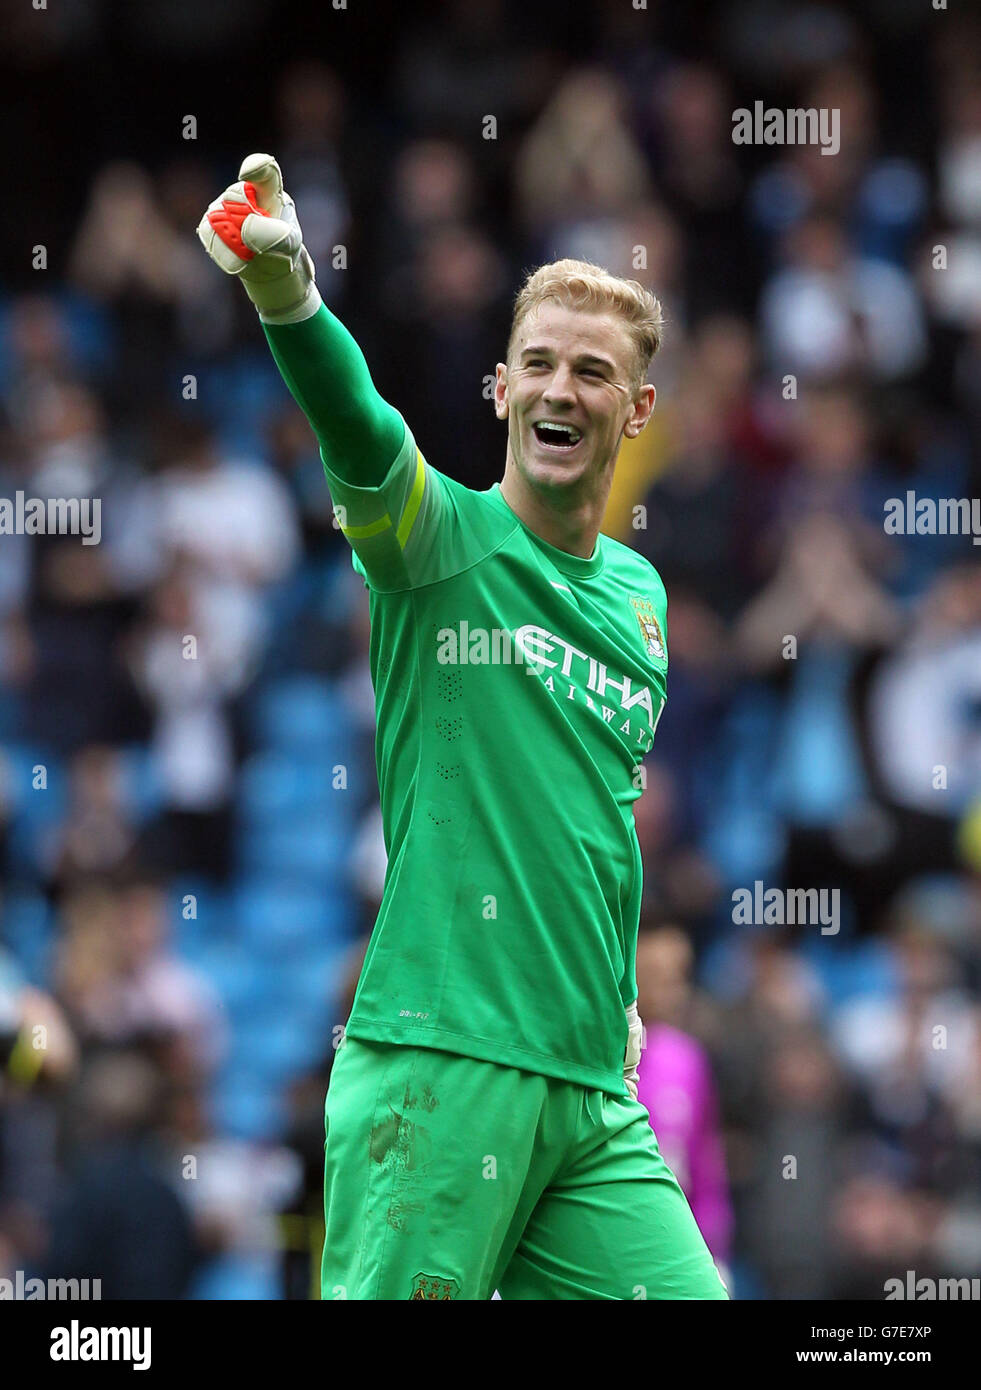 Soccer - Barclays Premier League - Manchester City v Tottenham Hotspur - Etihad Stadium. Manchester City's Joe Hart gestures to the crowd after the Barclays Premier League match at the Etihad Stadium, Manchester. Stock Photo